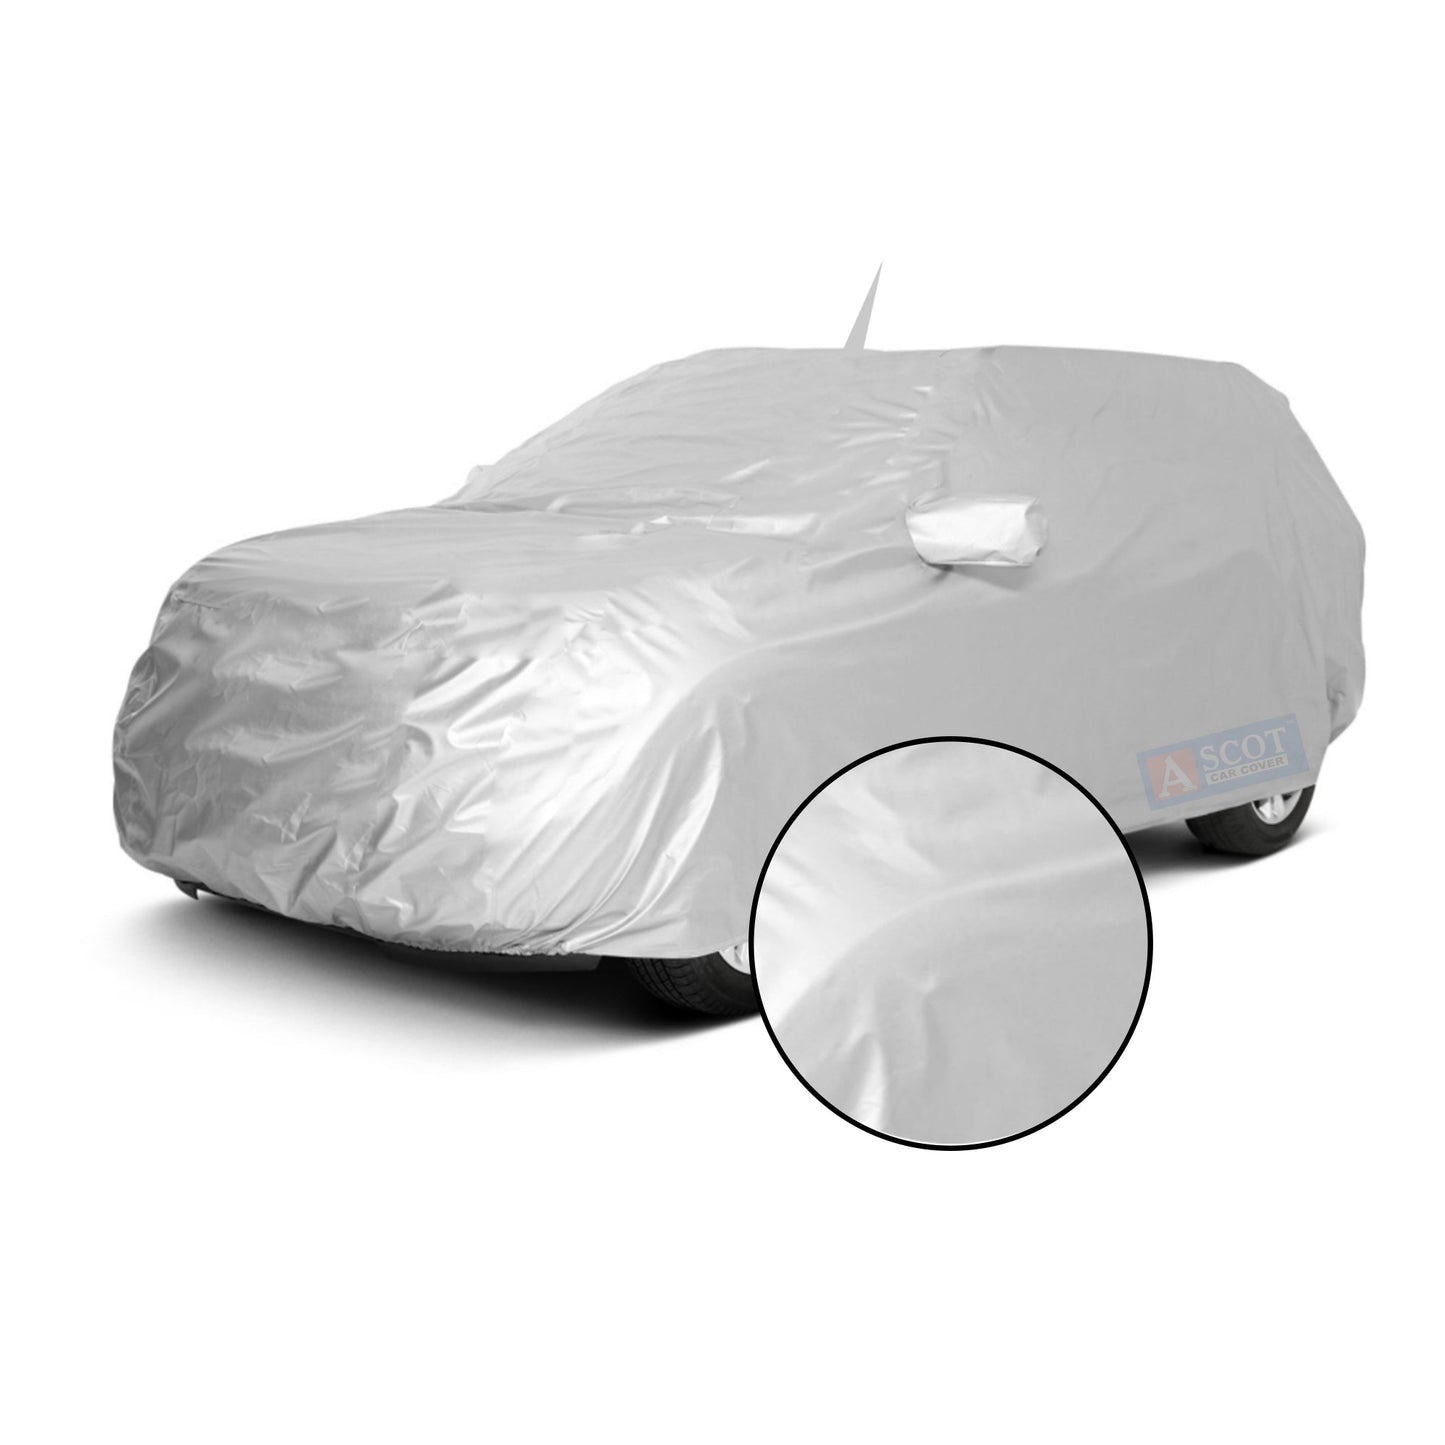 Ascot BMW X3 2003-2010 Model Car Body Cover Dust Proof, Trippel Stitched